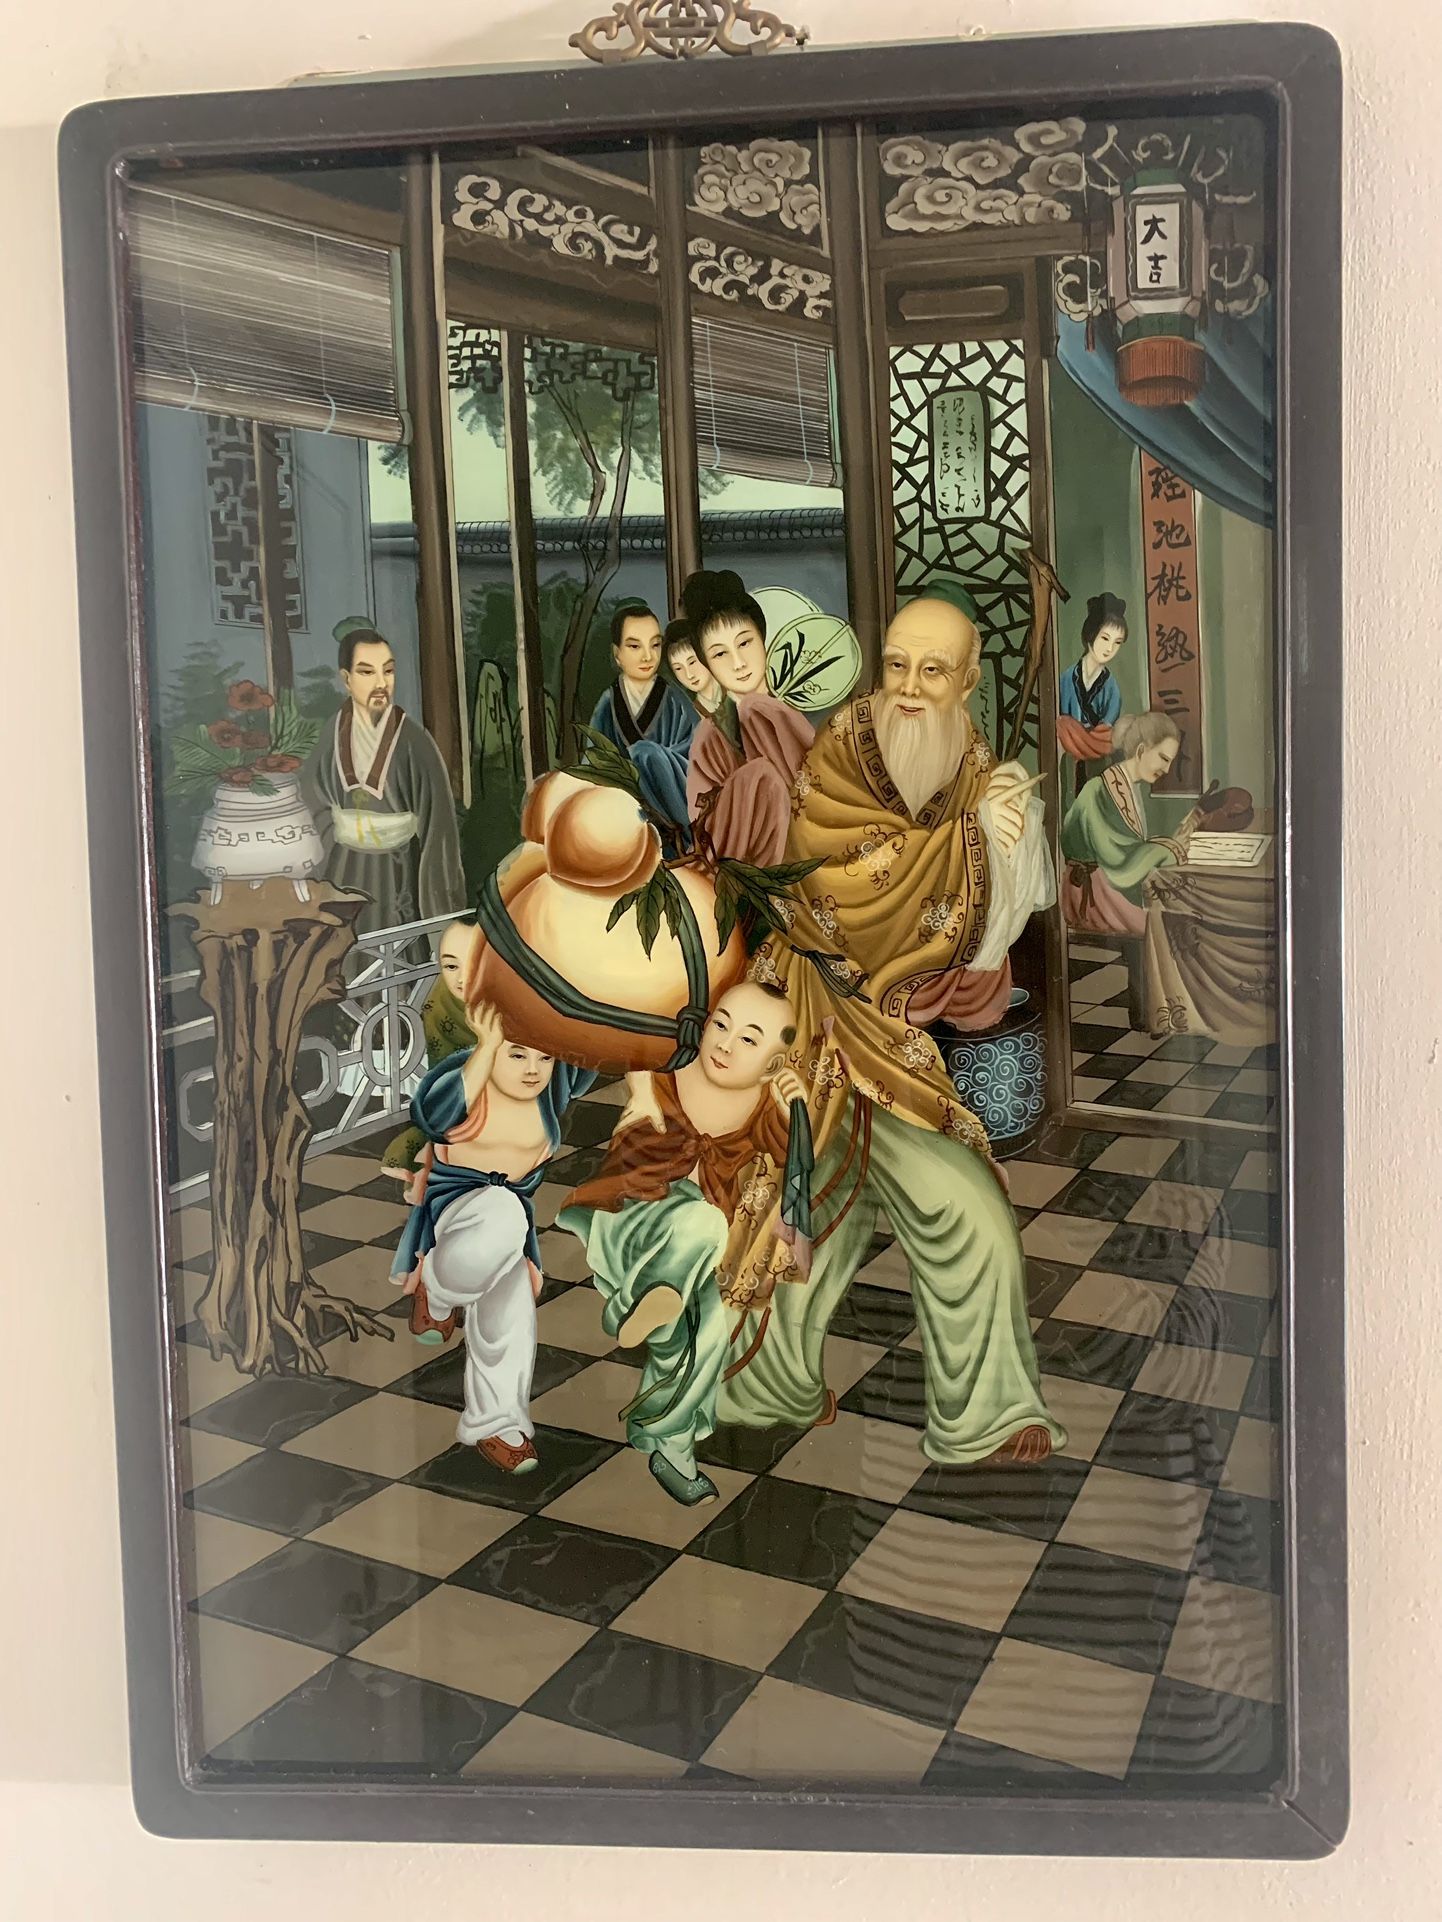 Gorgeous Vintage Chinese Reverse Painting On Glass